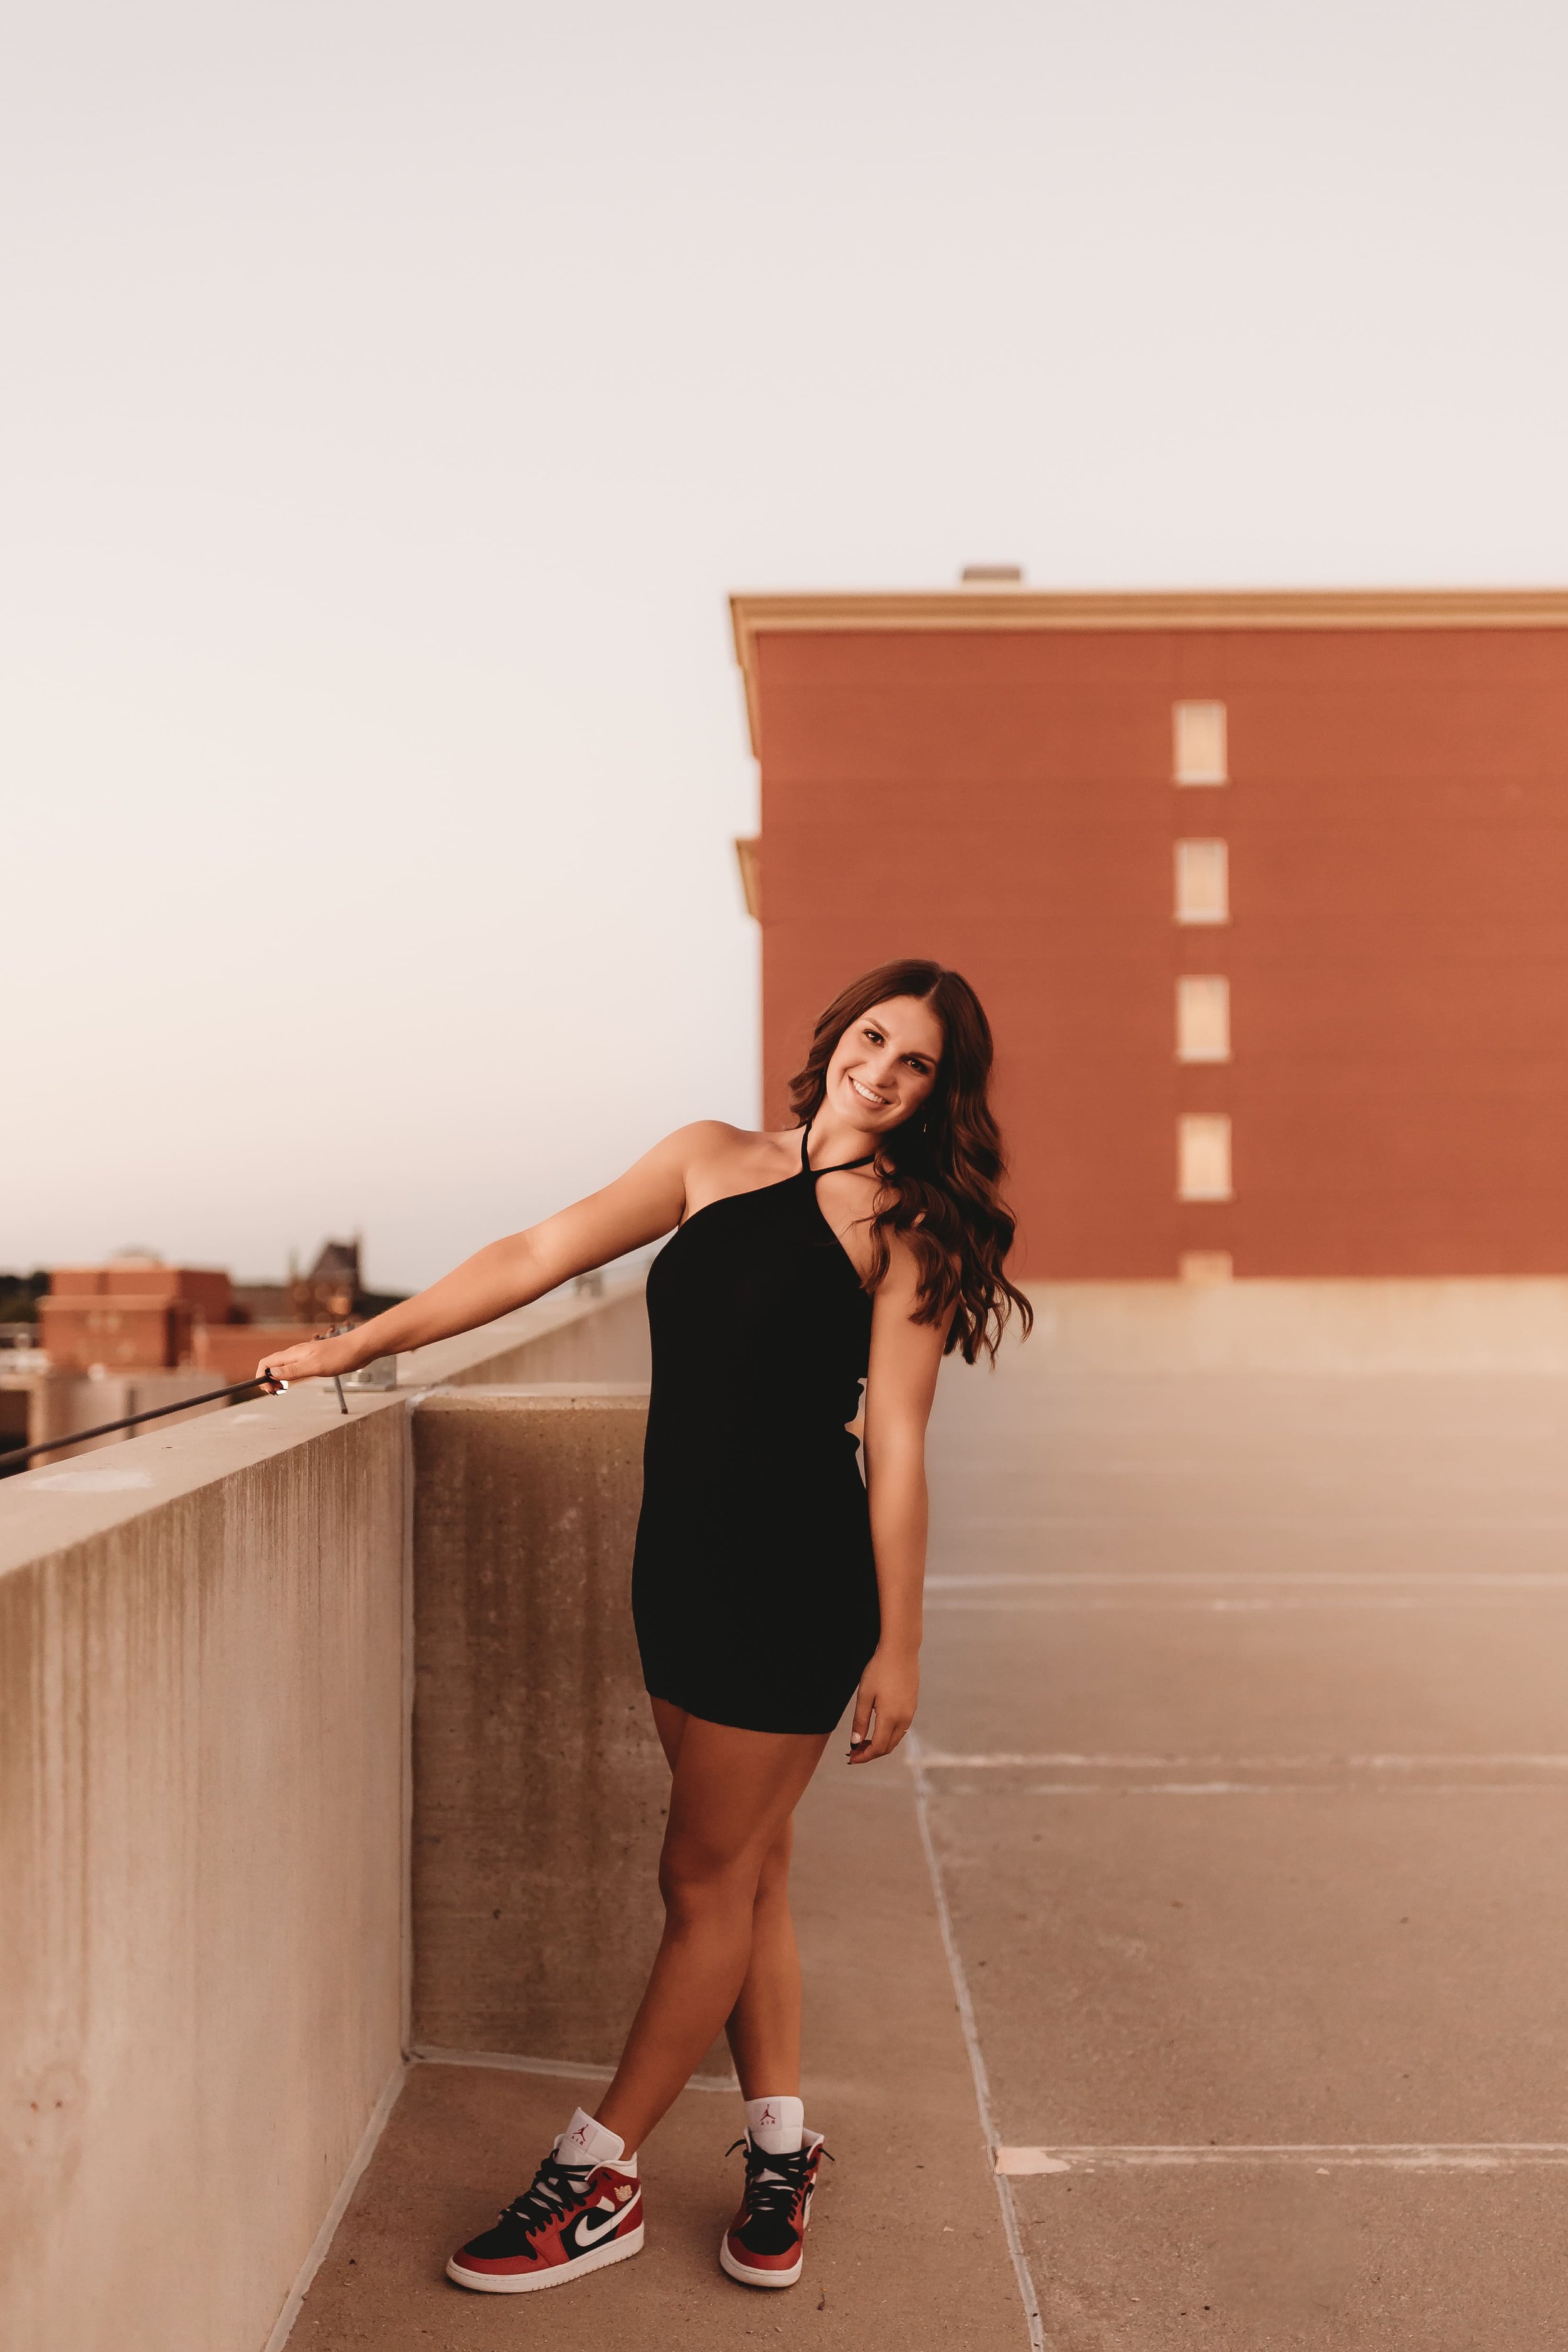  While posing for senior photographers near me, Katy leans away from the edge of a downtown peoria rooftop while smiling 